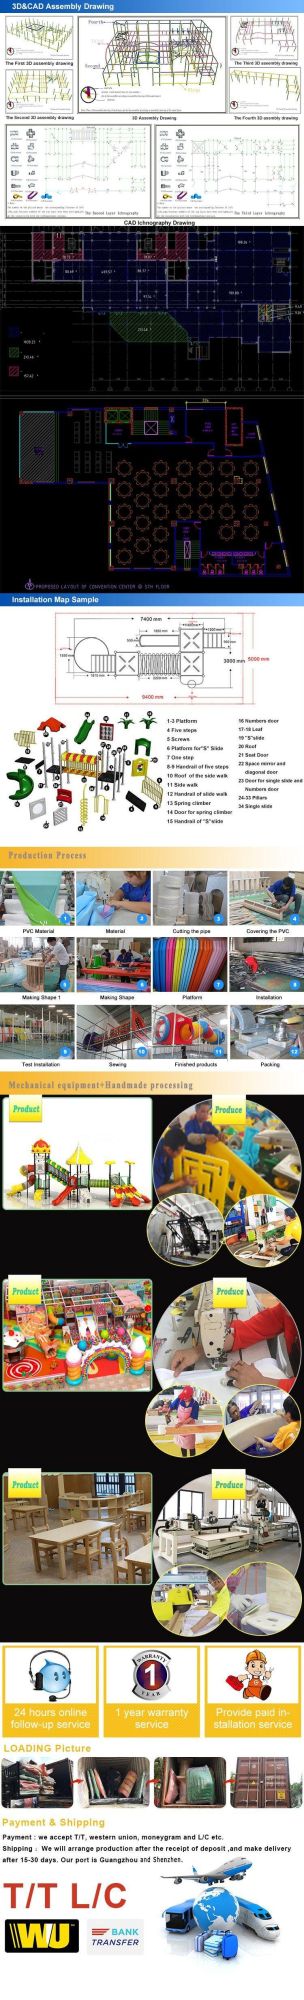 S019 Outdoor Playground Equipment Climbing Factory From China